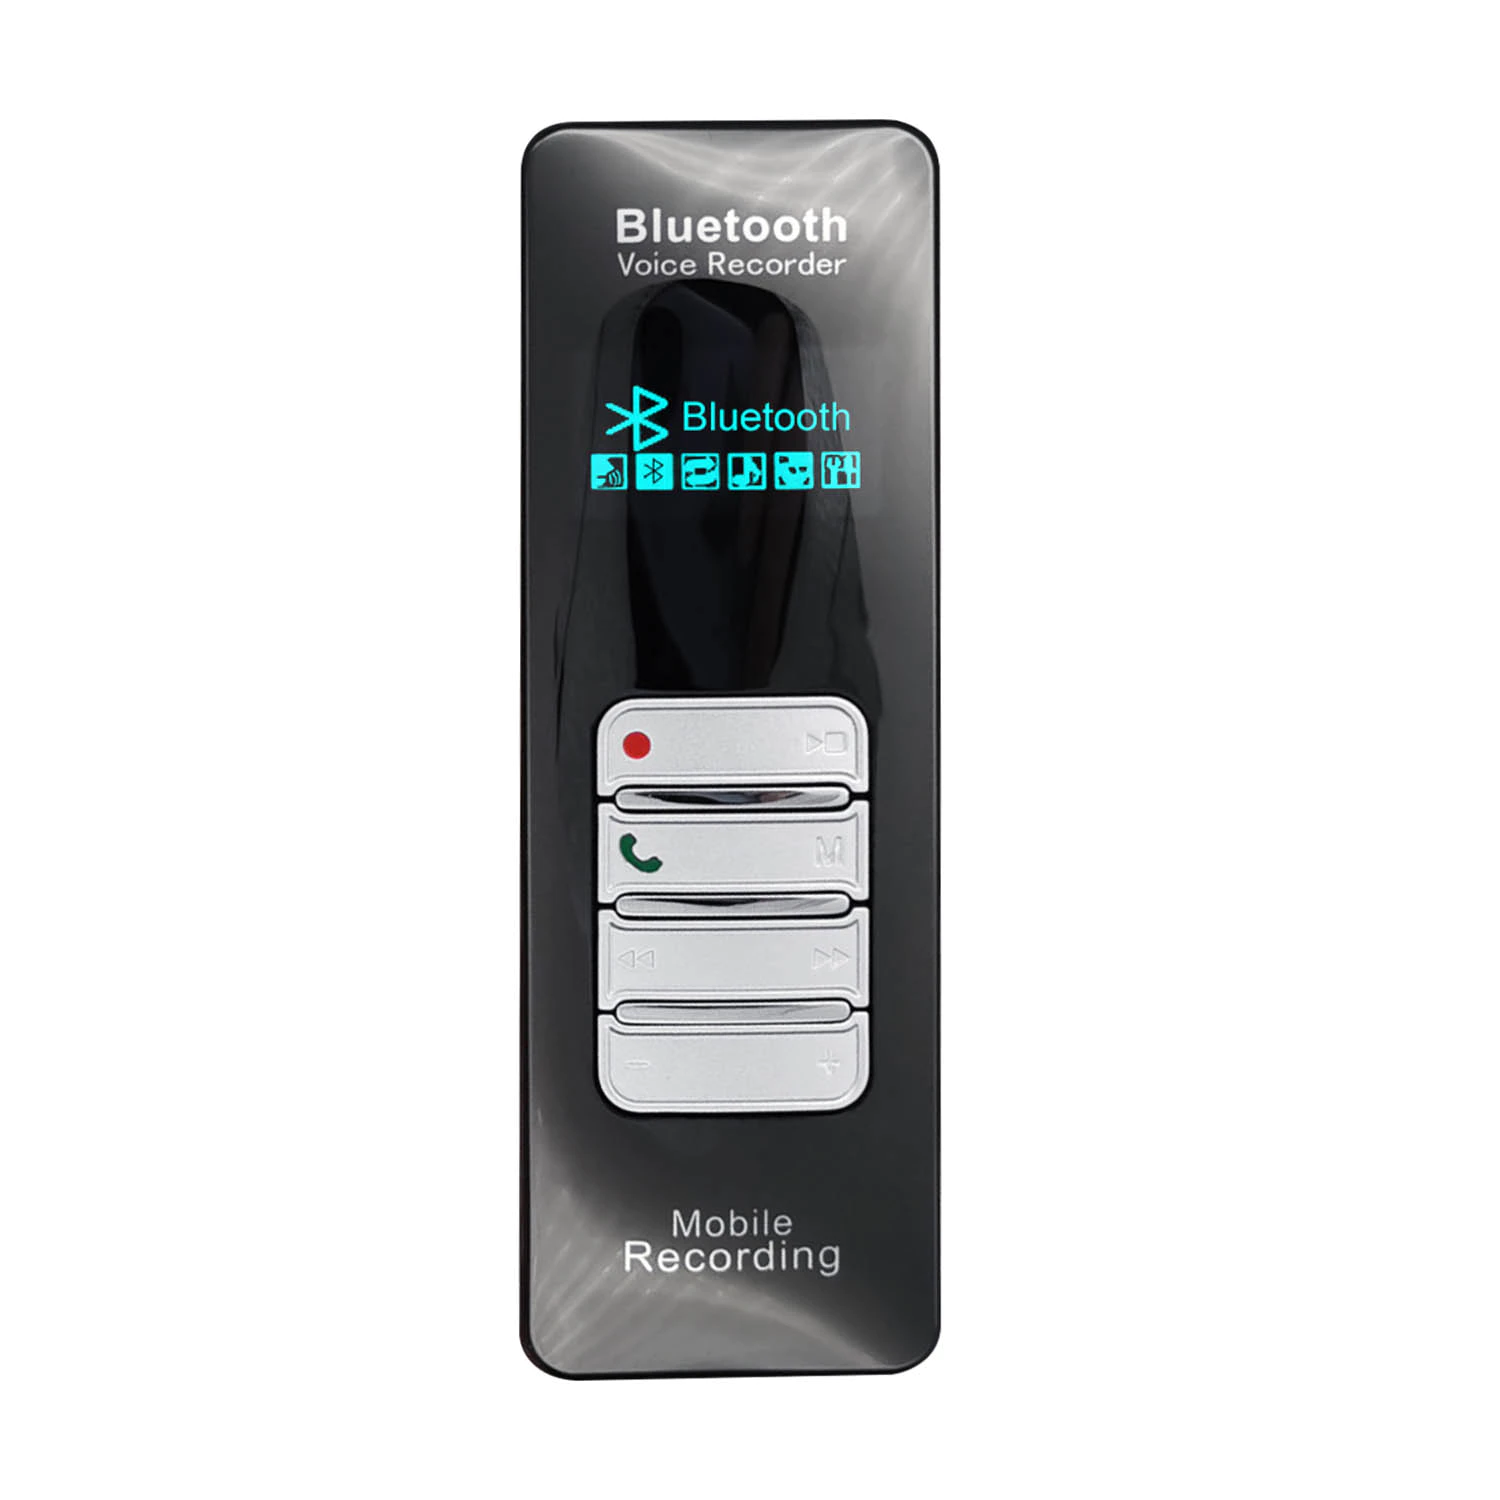 DVR-188 high quality voice recorder device